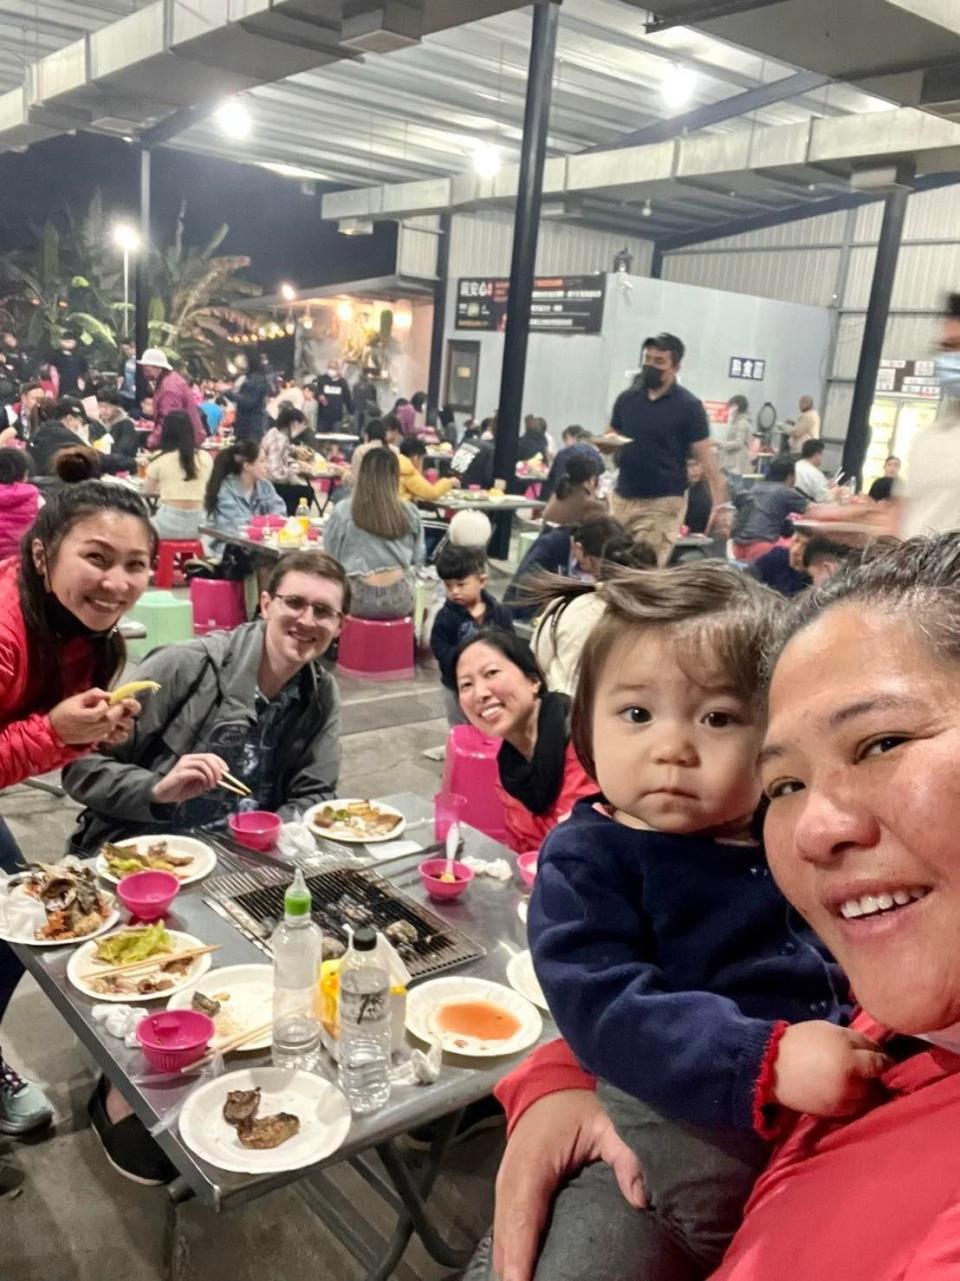 Leann Luong, Luong's daughter and her friends at a barbecue in Taiwan